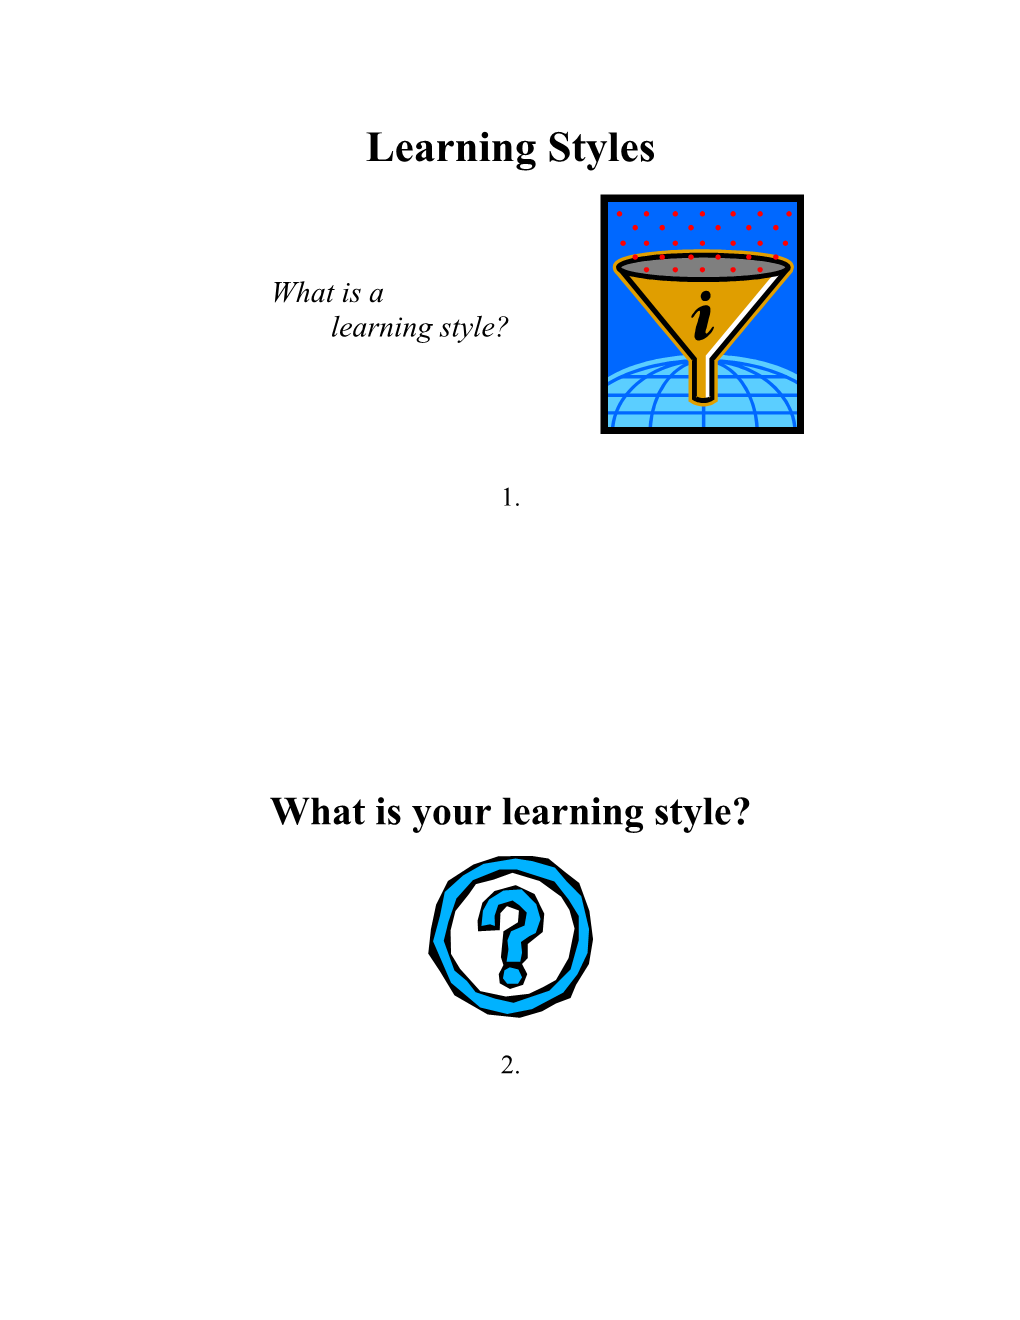 What Is Your Learning Style?